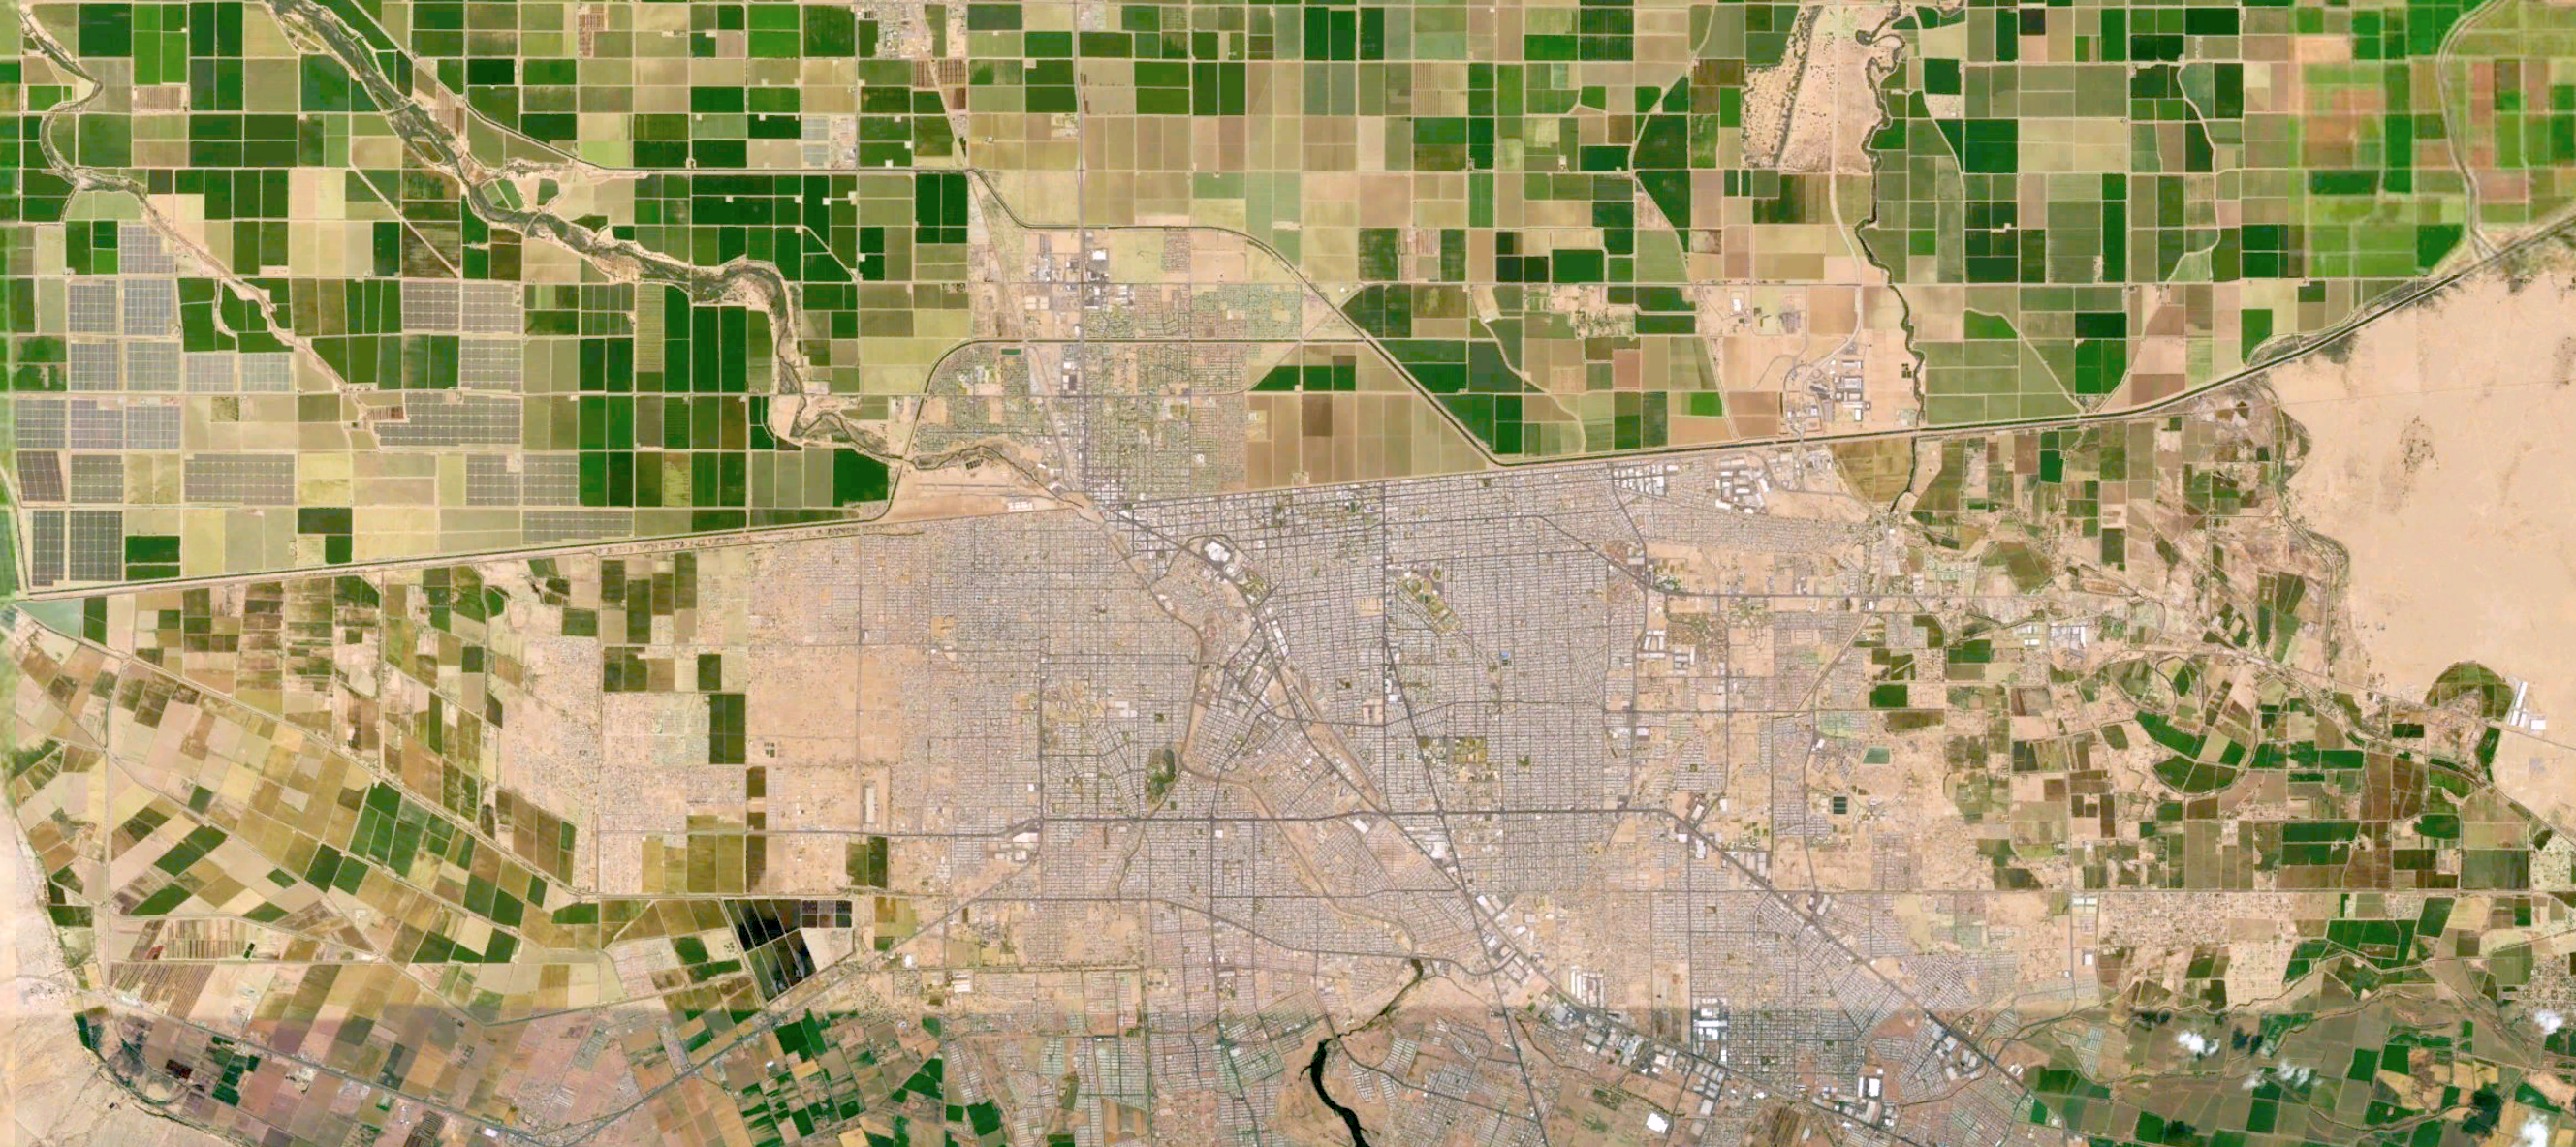 The twin cities of Mexicali and Calexico are my archetypal example of the &ldquo;pileup&rdquo; effect. The border is clearly visible.